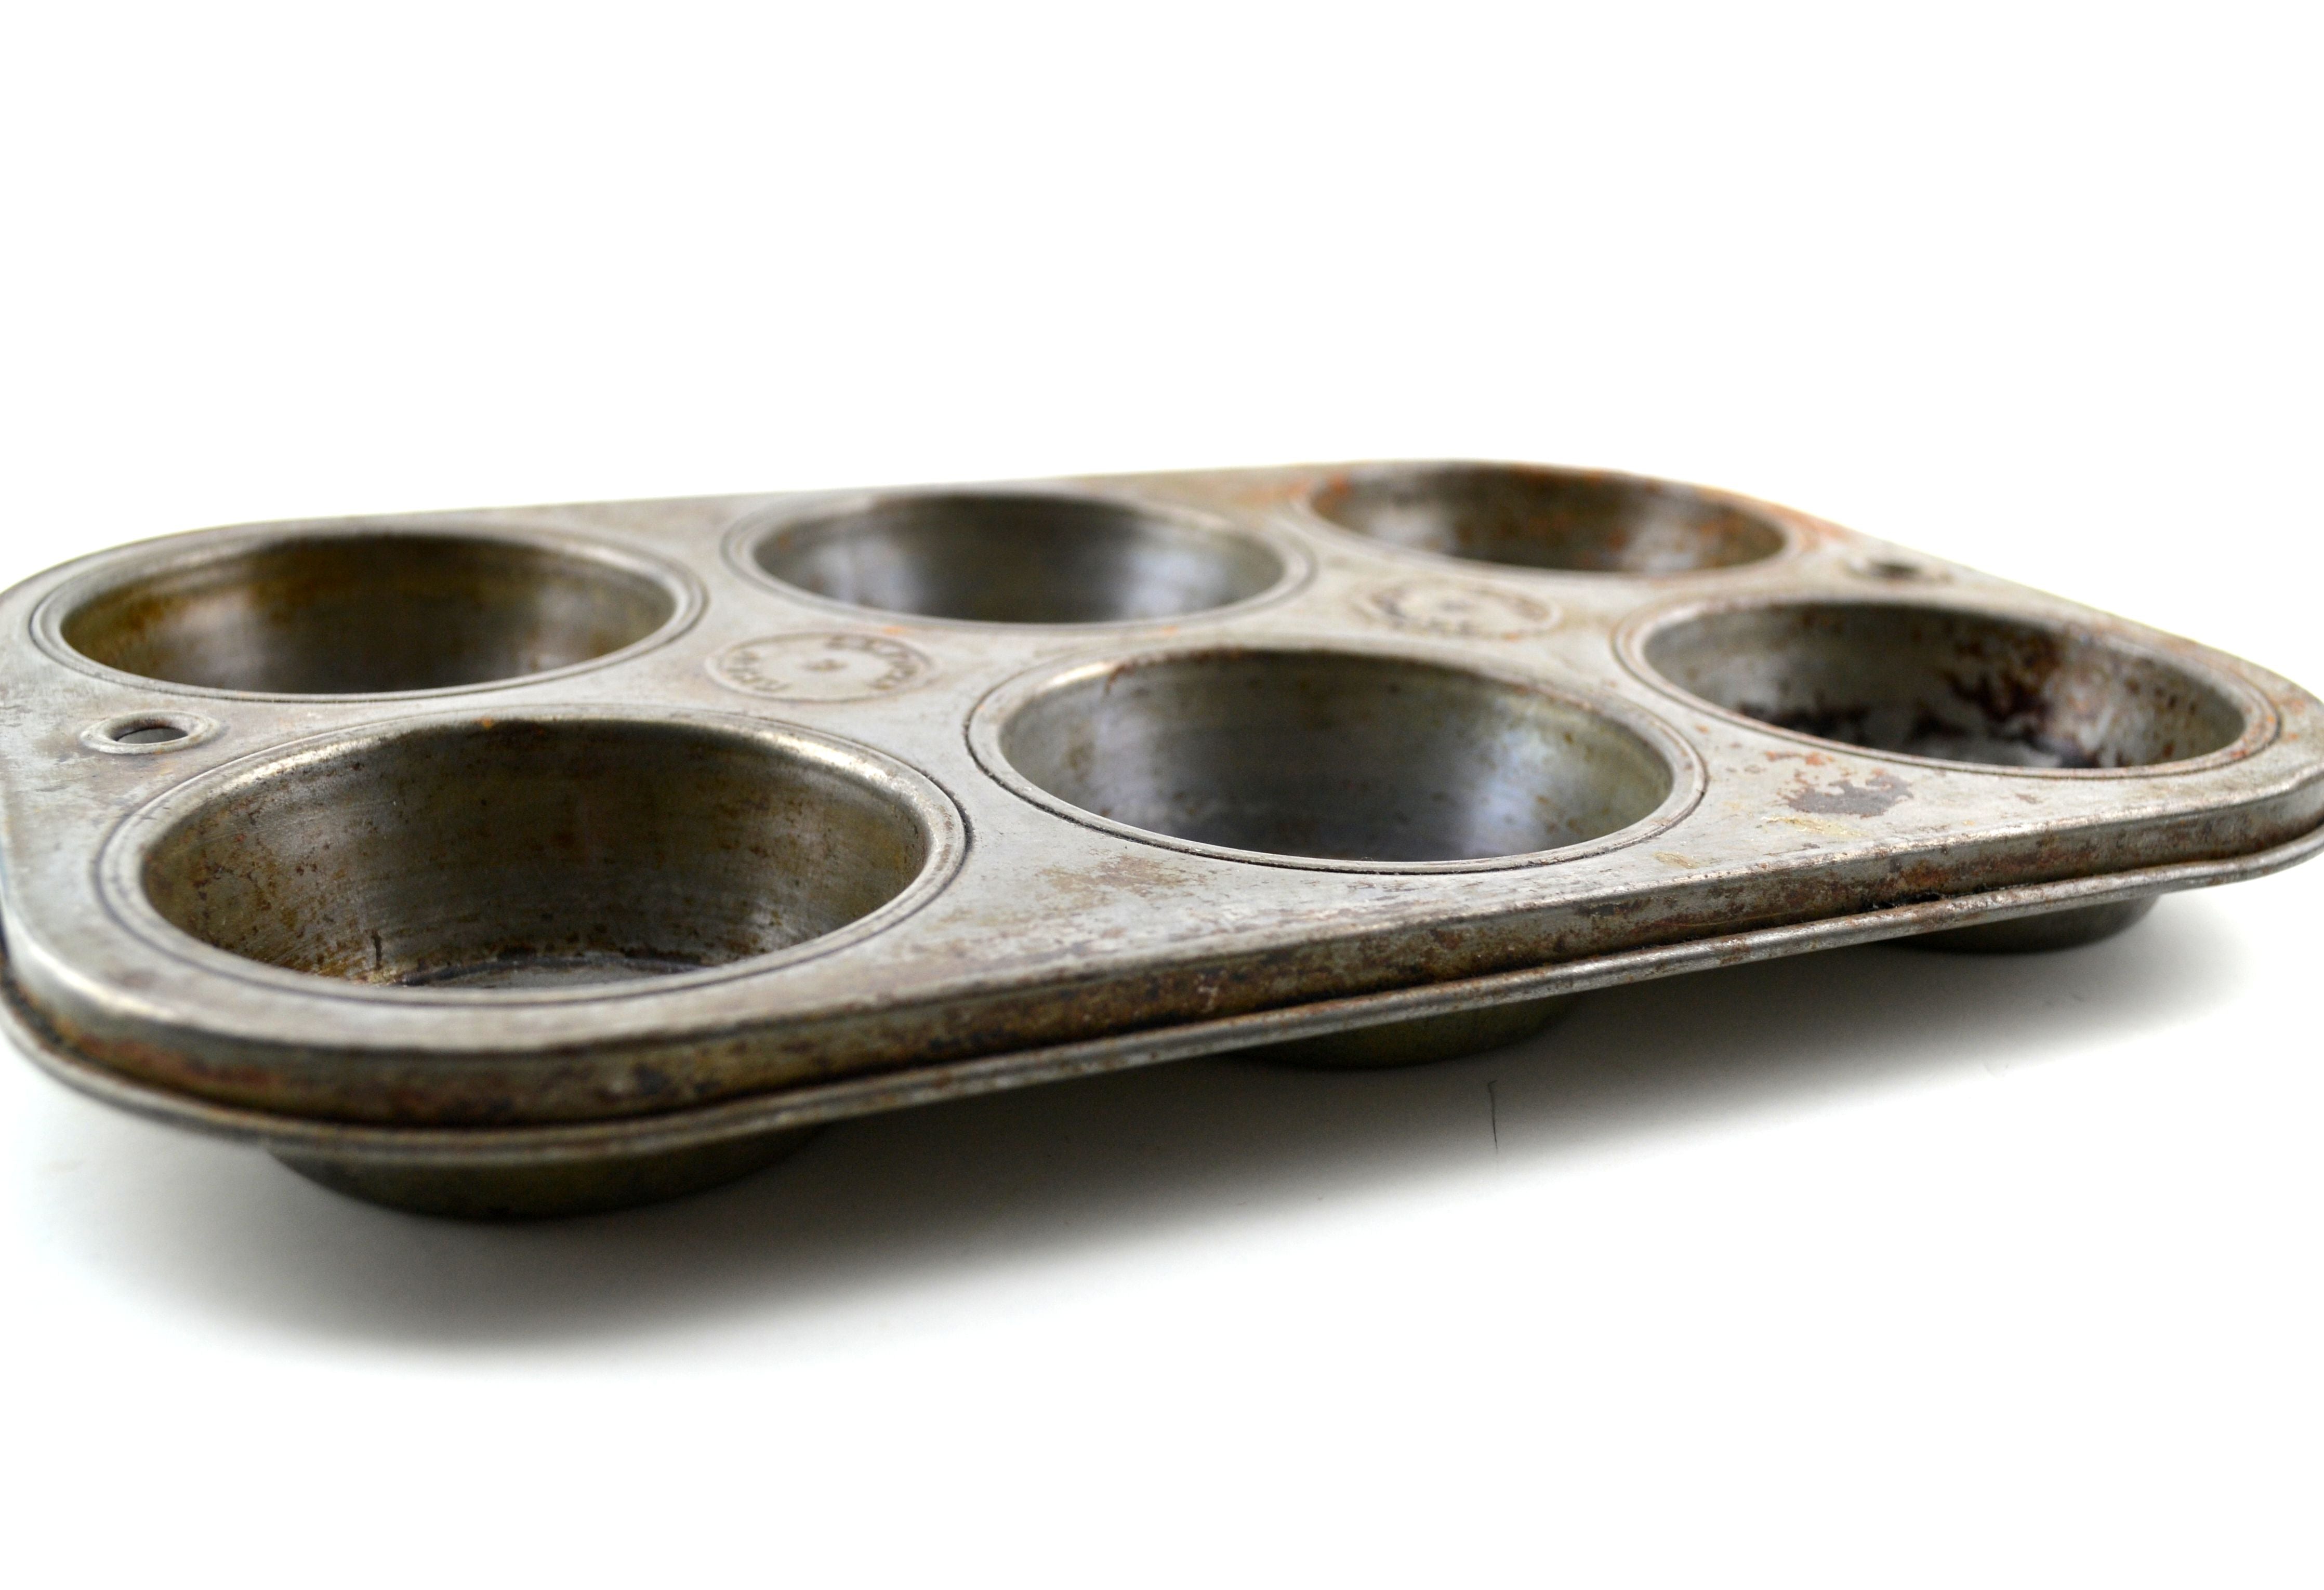 Buy Deep stainless steel muffin tins